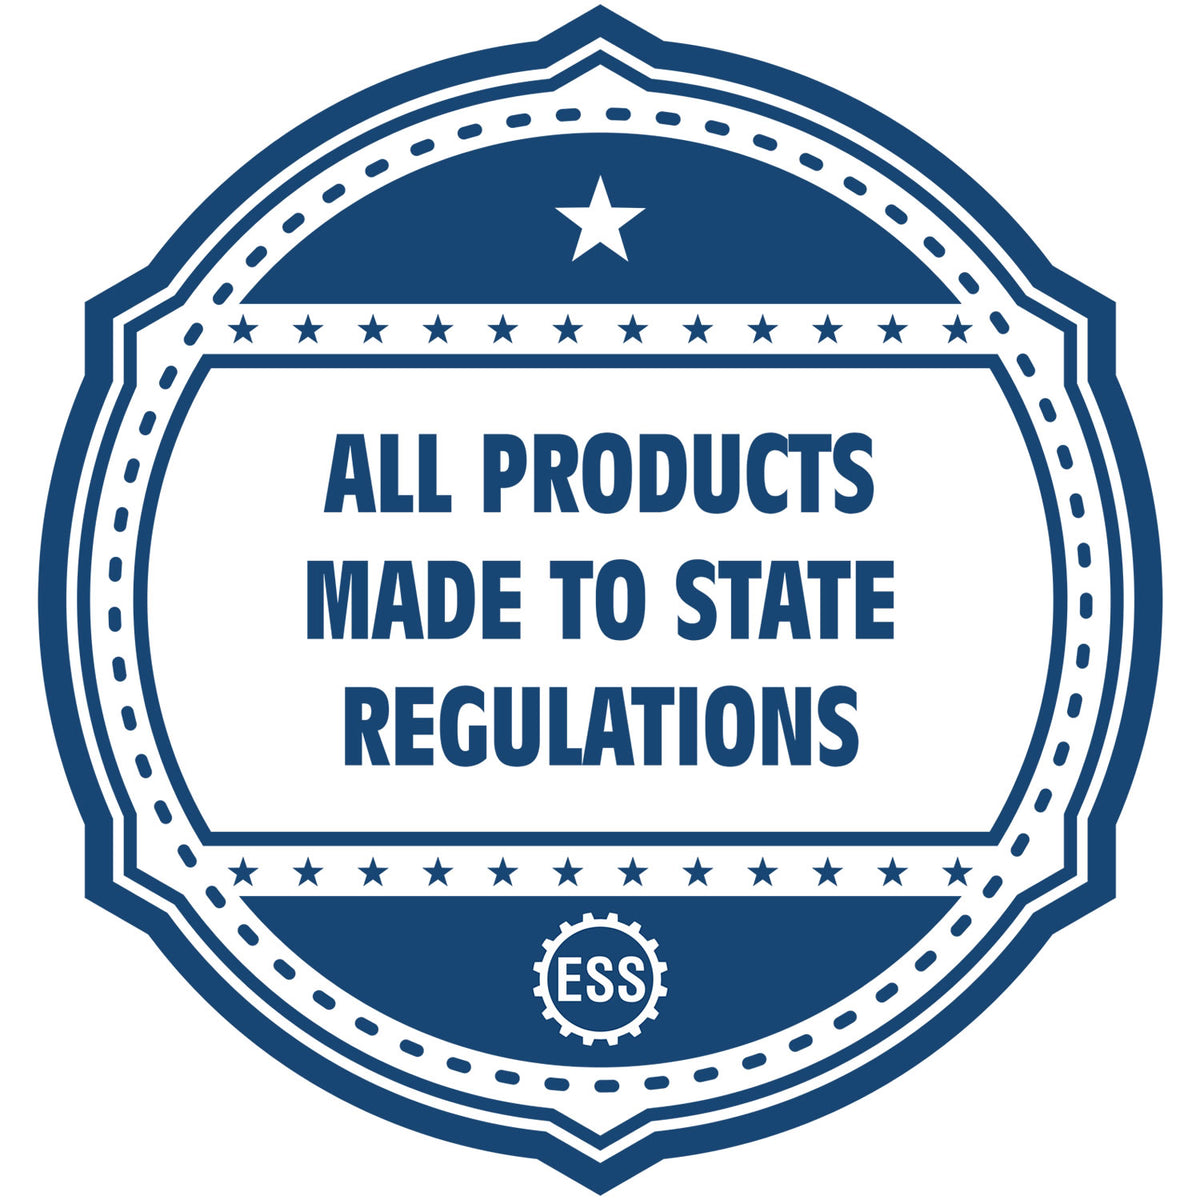 A blue icon or badge for the Gift Illinois Landscape Architect Seal showing that this product is made in compliance with state regulations.